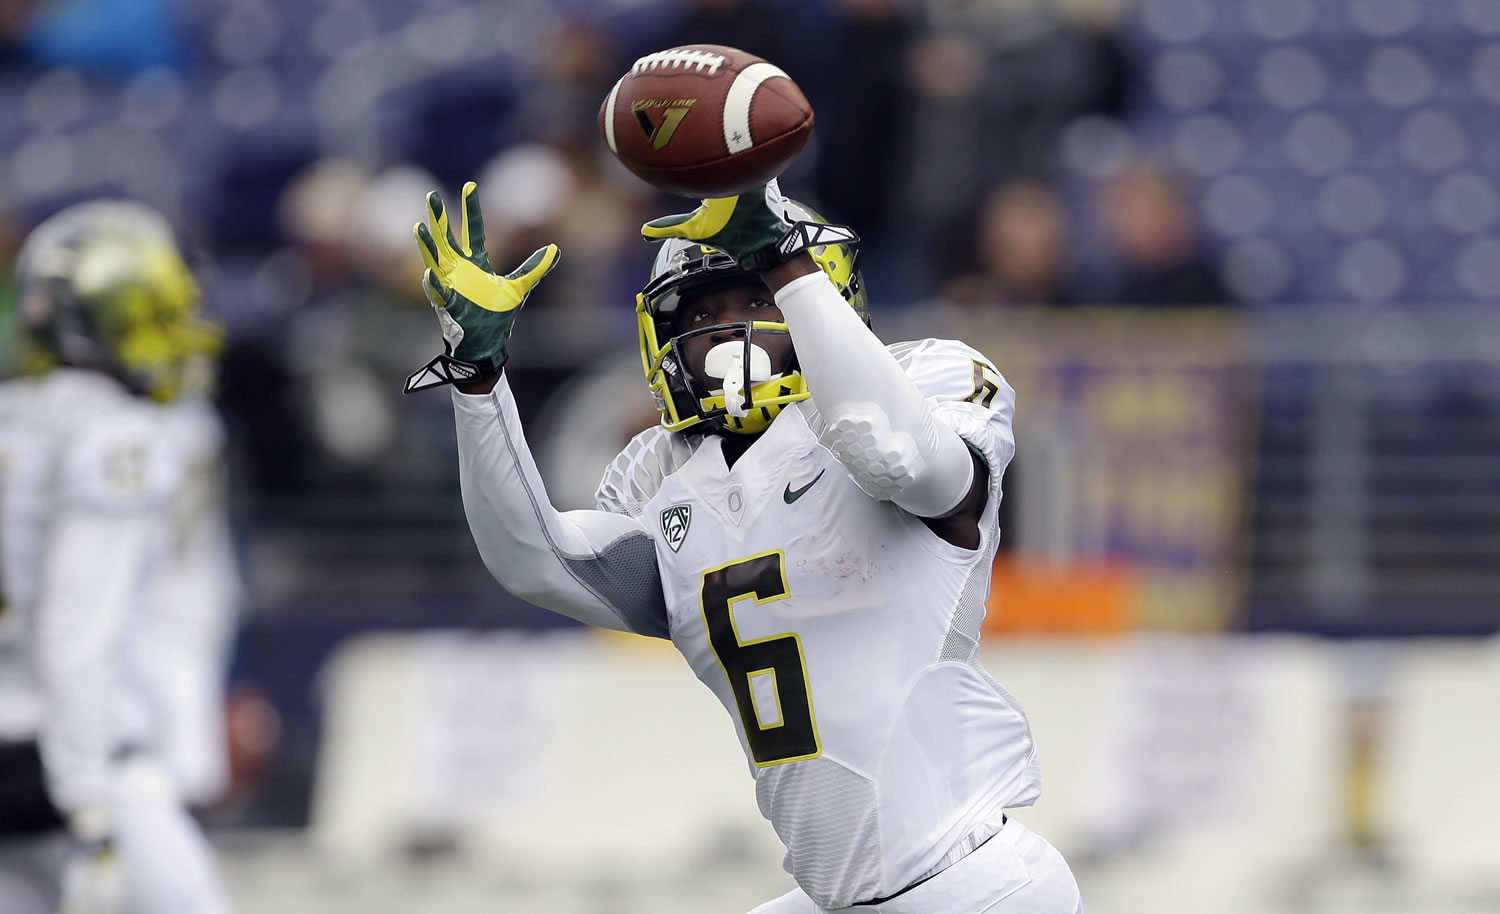 Oregon running back De'Anthony Thomas reaches for a pass during warmups before an NCAA college football game against Washington in Seattle. Thomas is expected to return Saturday, Oct.